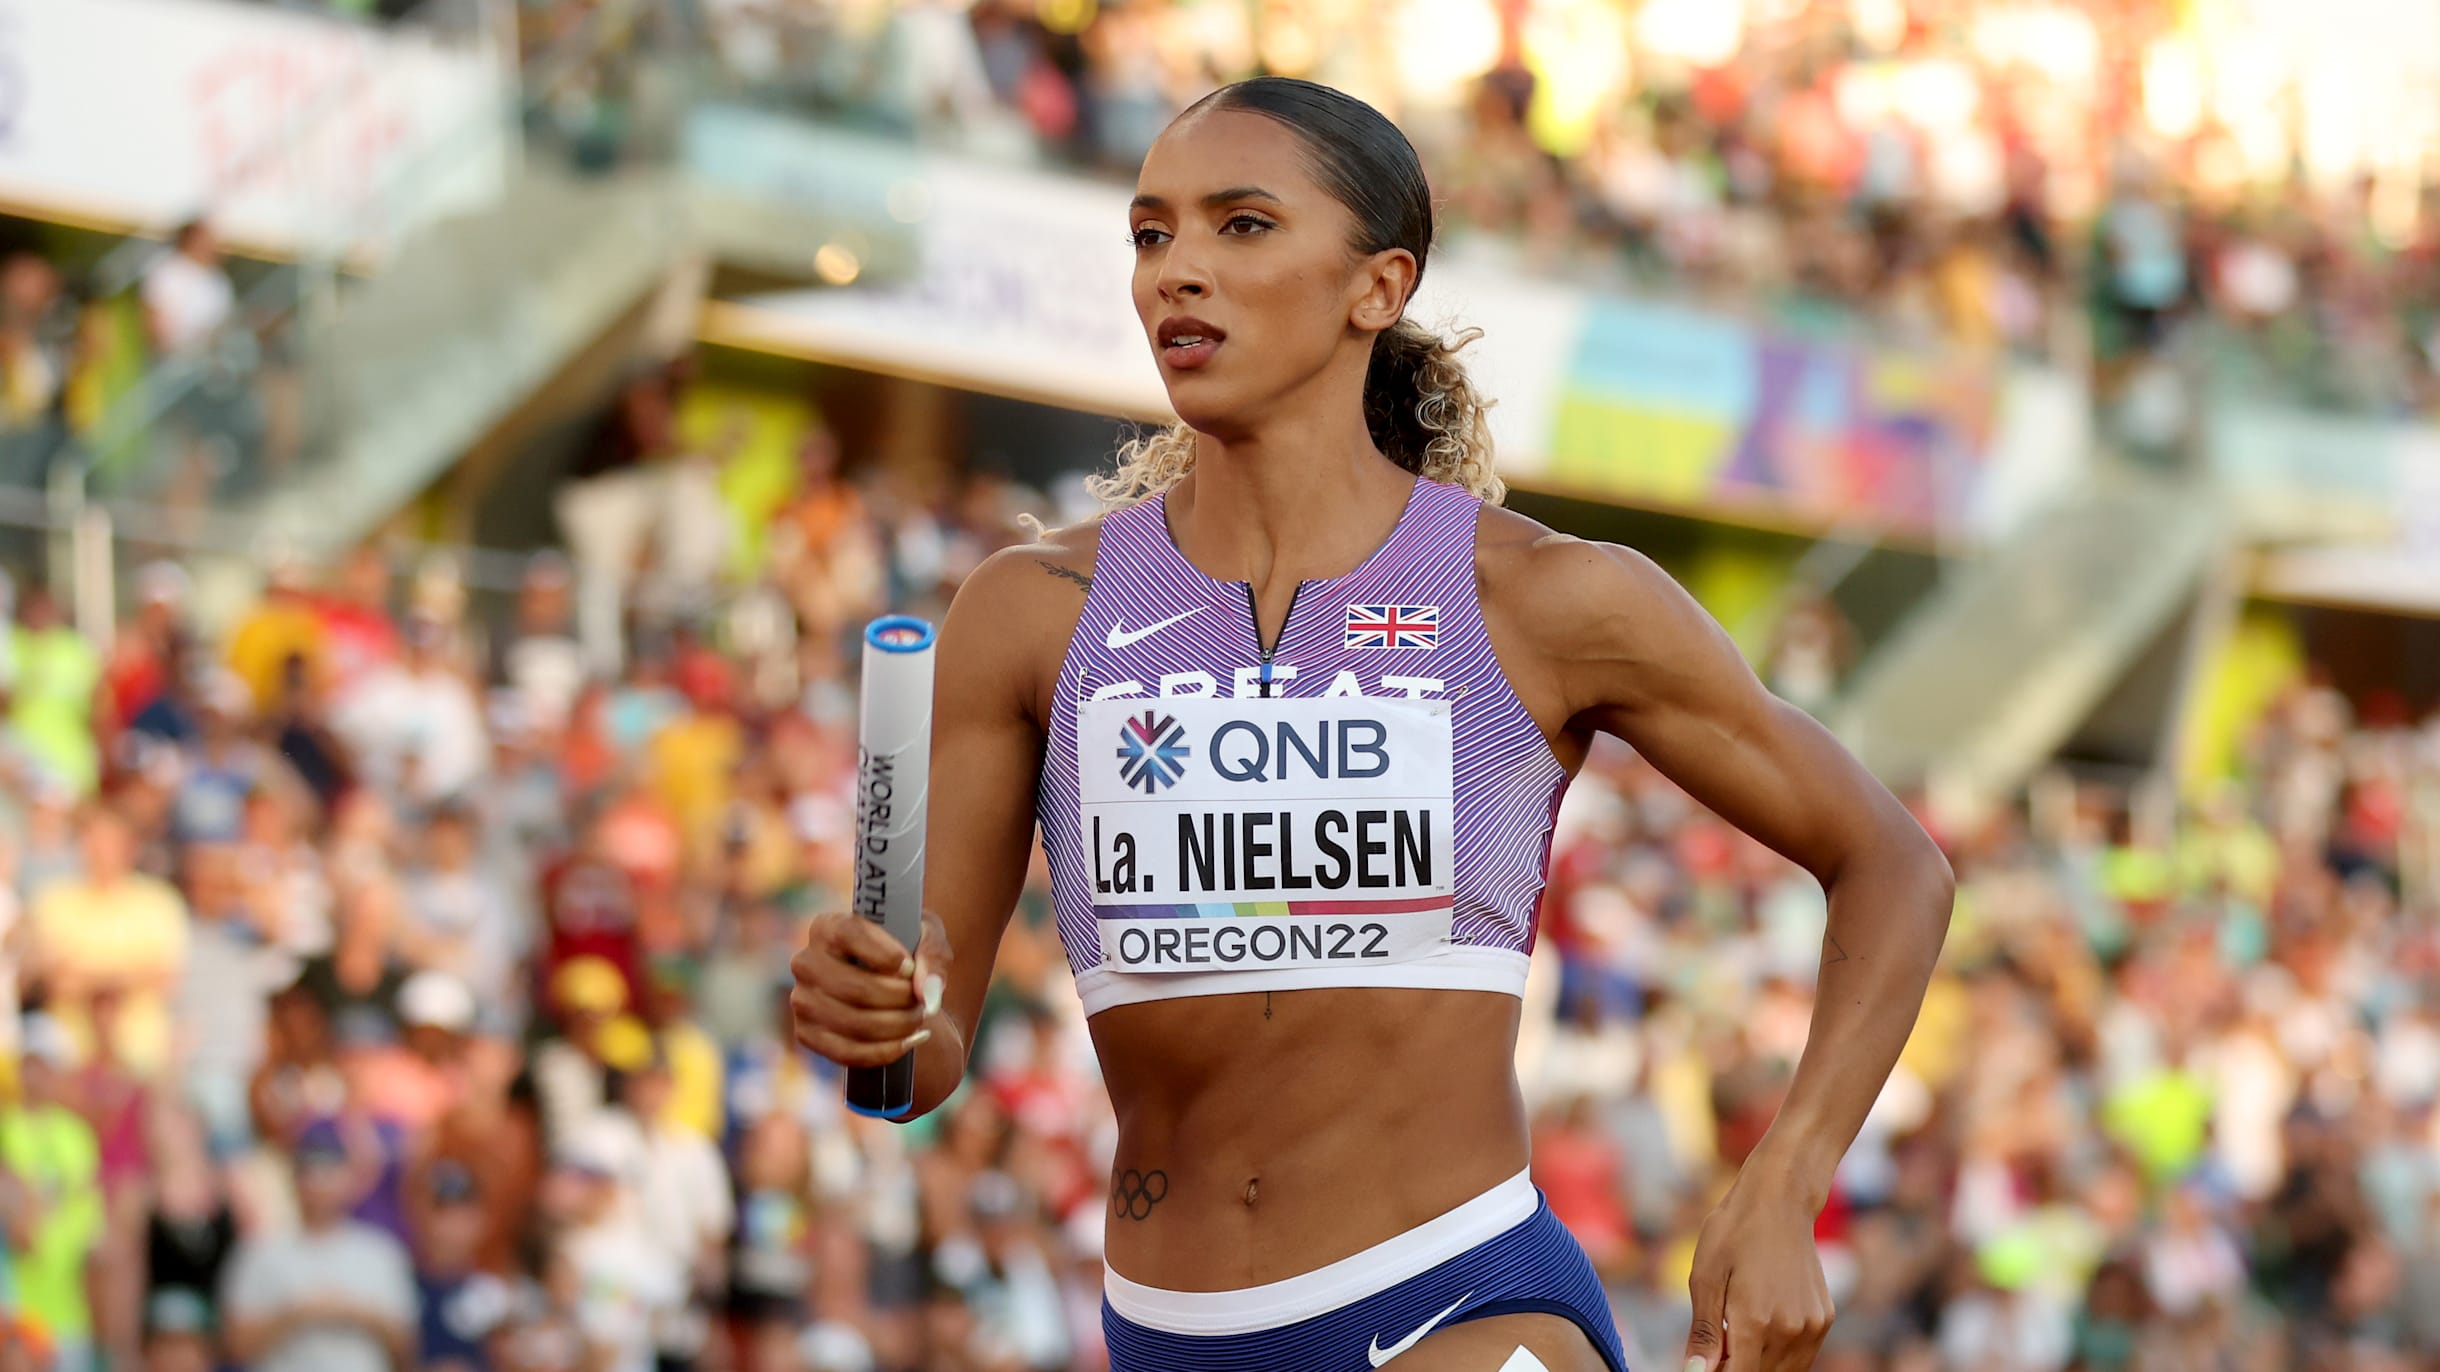 Great Britain star Laviai Nielsen promoting healthy lifestyles for positive  change: “I think movement is such an important aspect of everyday life